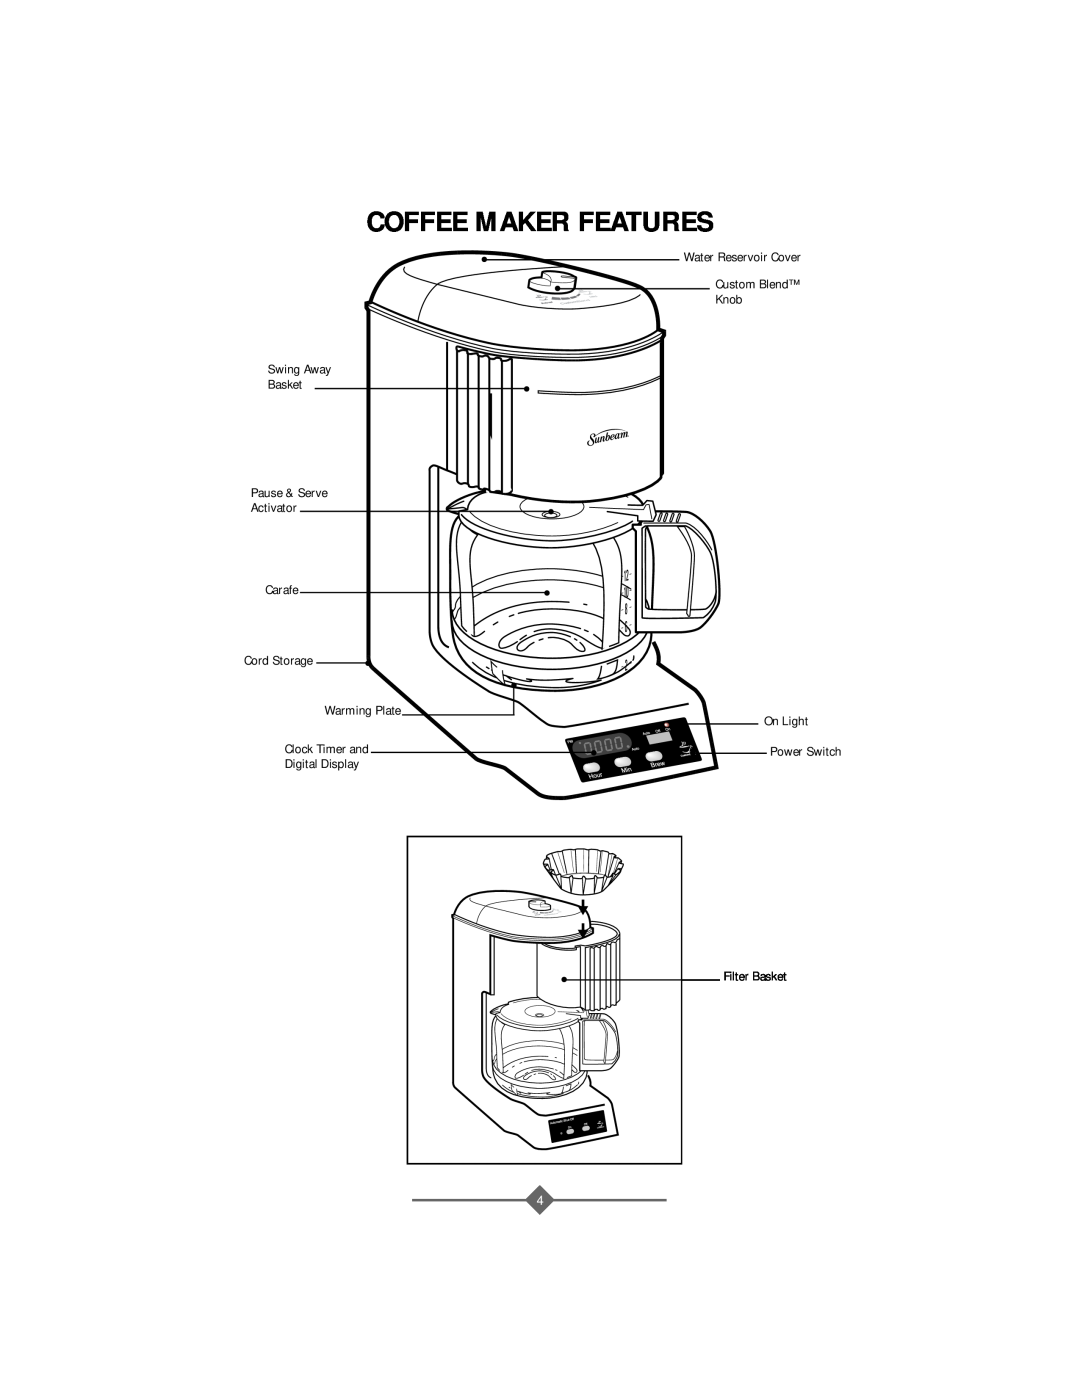 Sunbeam 32863281 Coffee Maker Features, Swing Away Basket Pause & Serve Activator Carafe, Digital Display, Power Switch 